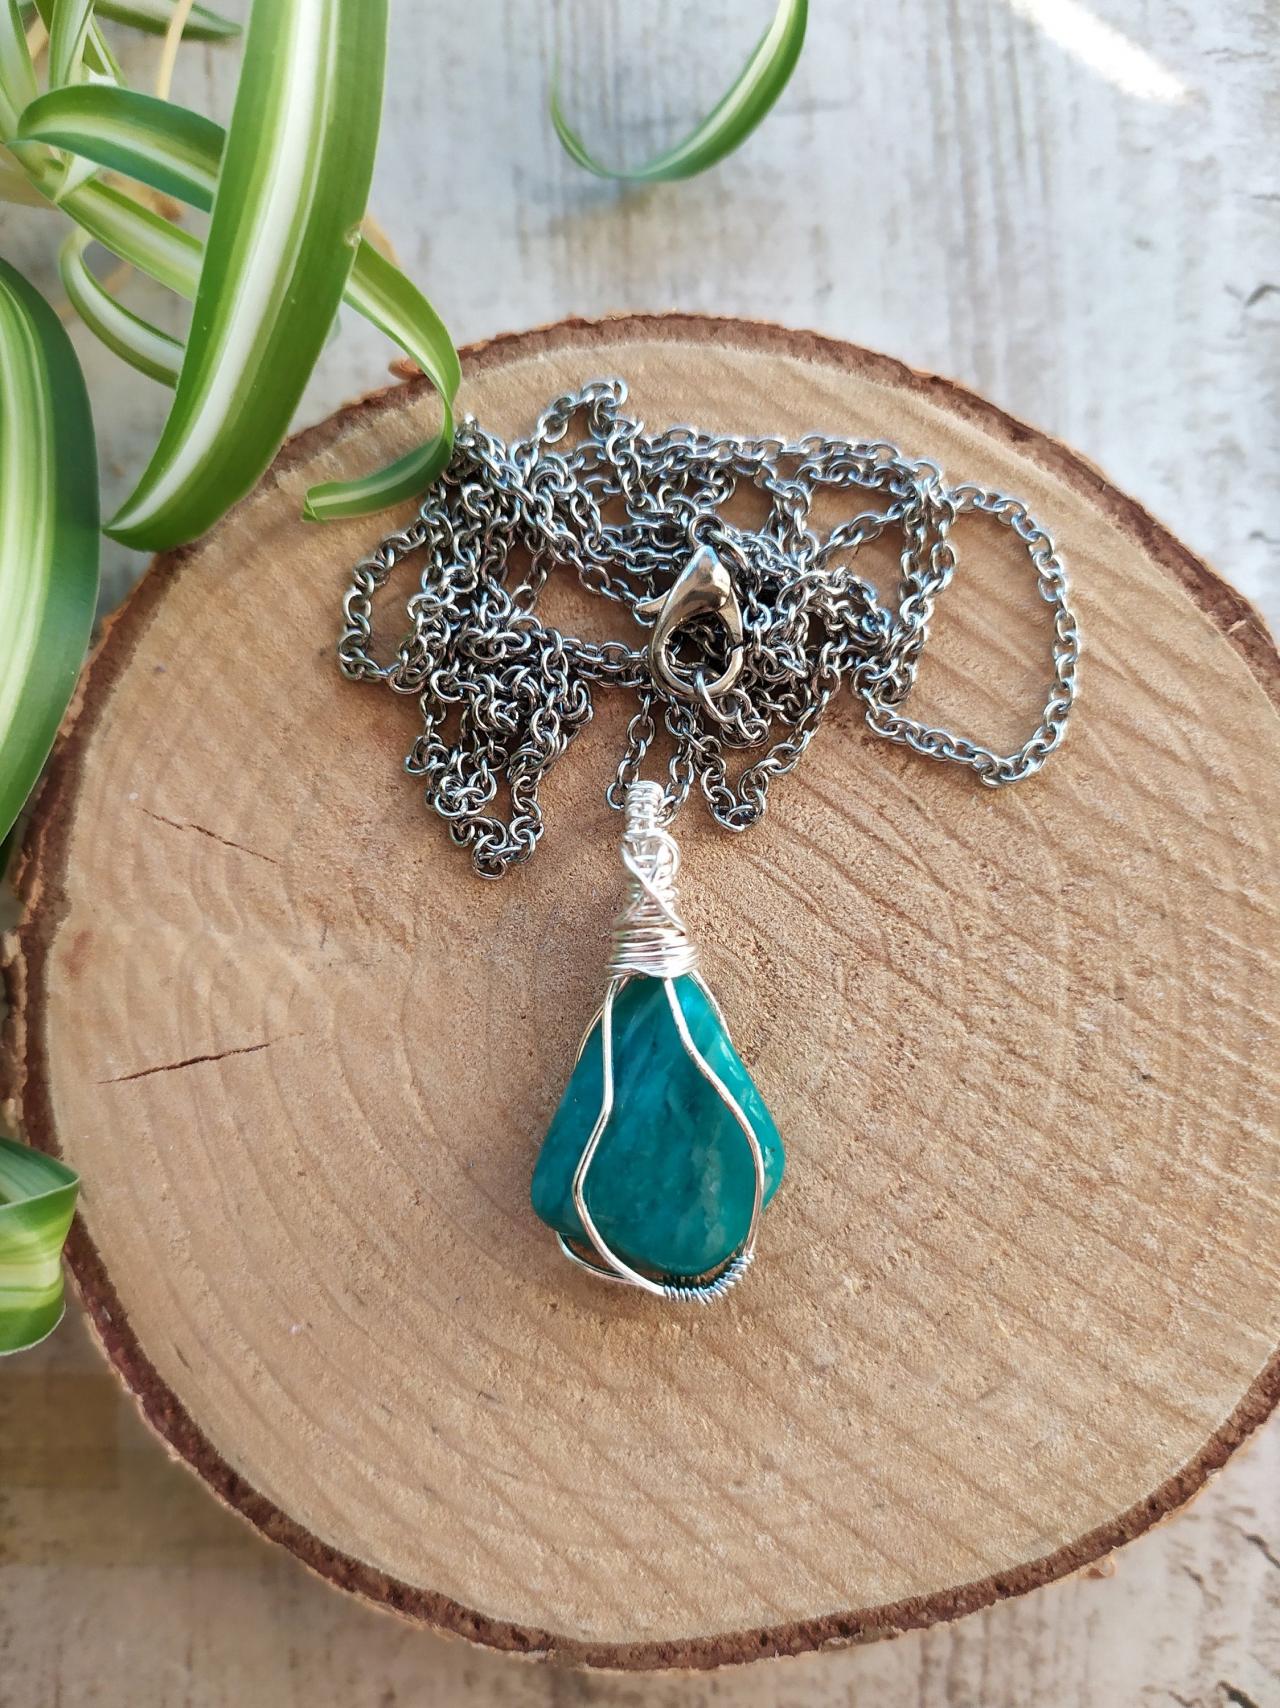 Wire Wrapped Silver Amazonite Pendant, Green Gemstone Necklace, Bohemian Long Chain Layering Pendant,natural Stone Choker, 4 In One Necklace